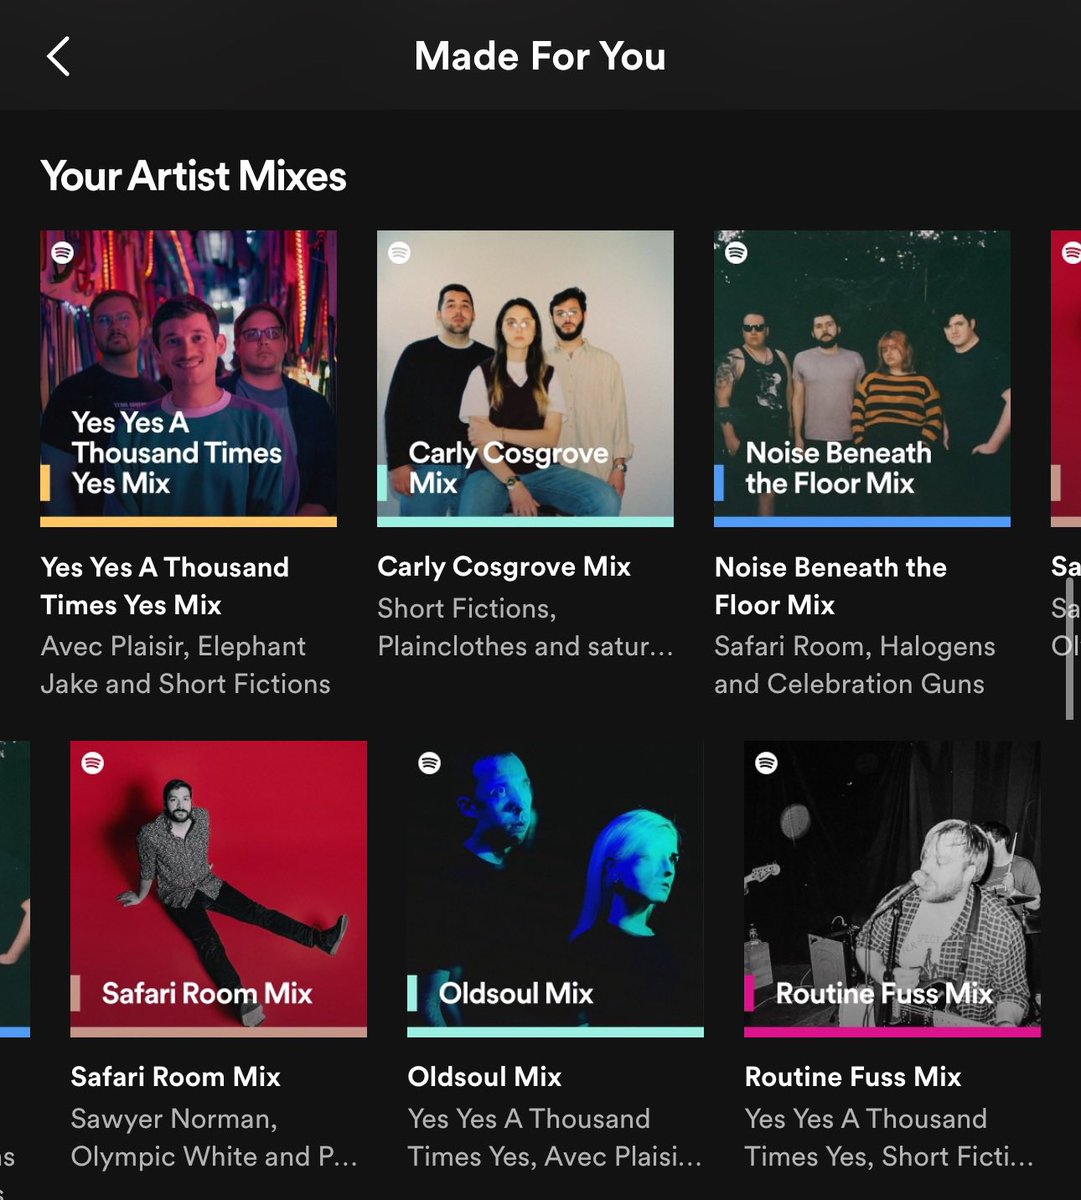 What are your highlighted artist mixes on Spotify today? Mine are very unsurprising:

Yes Yes a Thousand Times Yes
Carly Cosgrove
Noise Beneath the Floor
Safari Room
Oldsoul
Routine Fuss